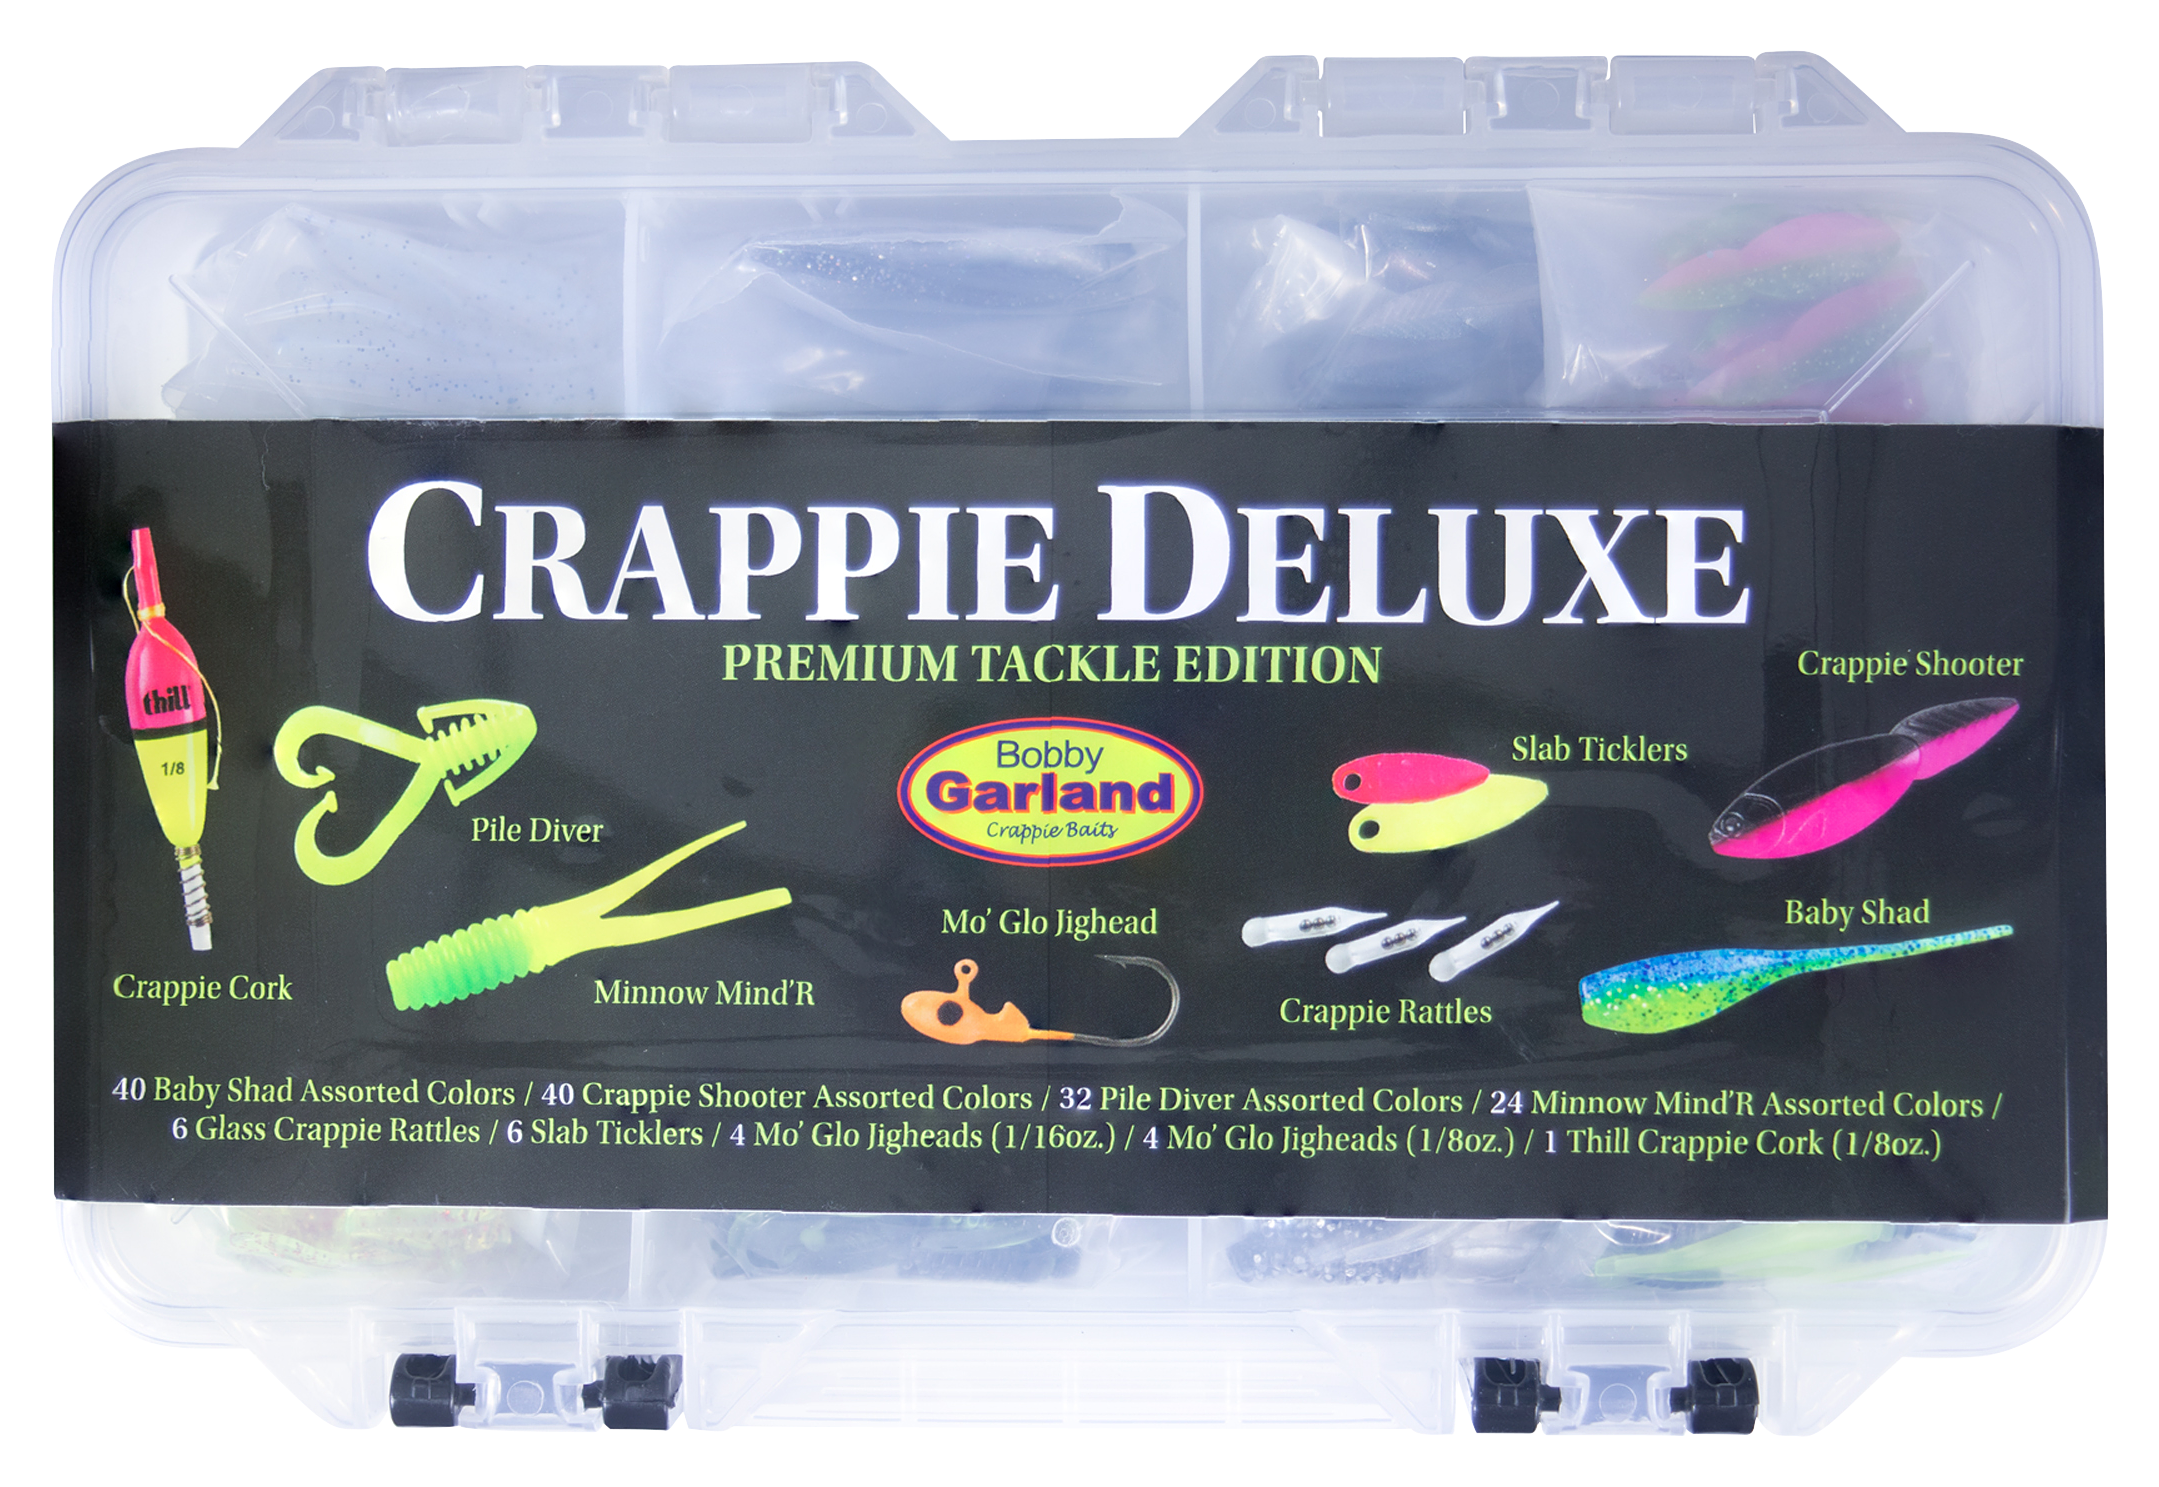 Bobby Garland 158-Piece Deluxe Crappie Kit